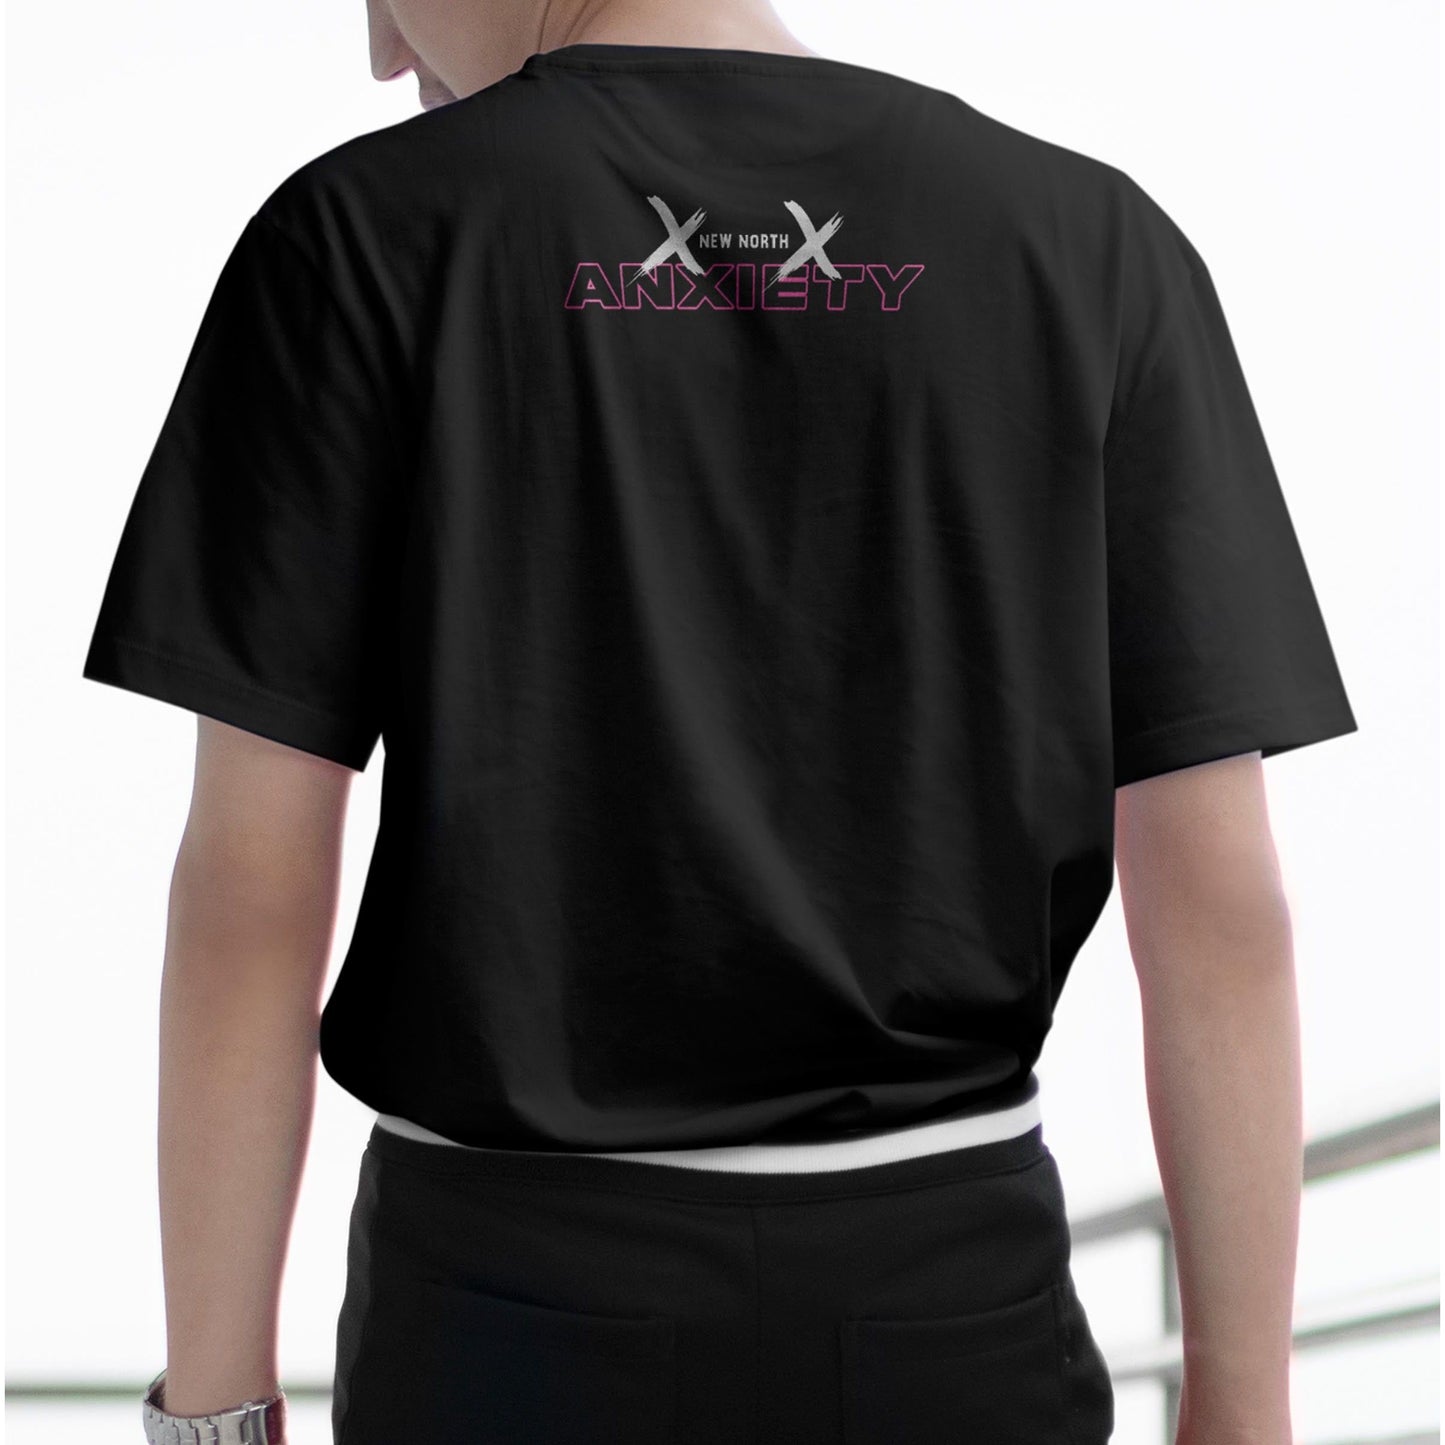 New Anxiety Relaxed T-shirt for Men